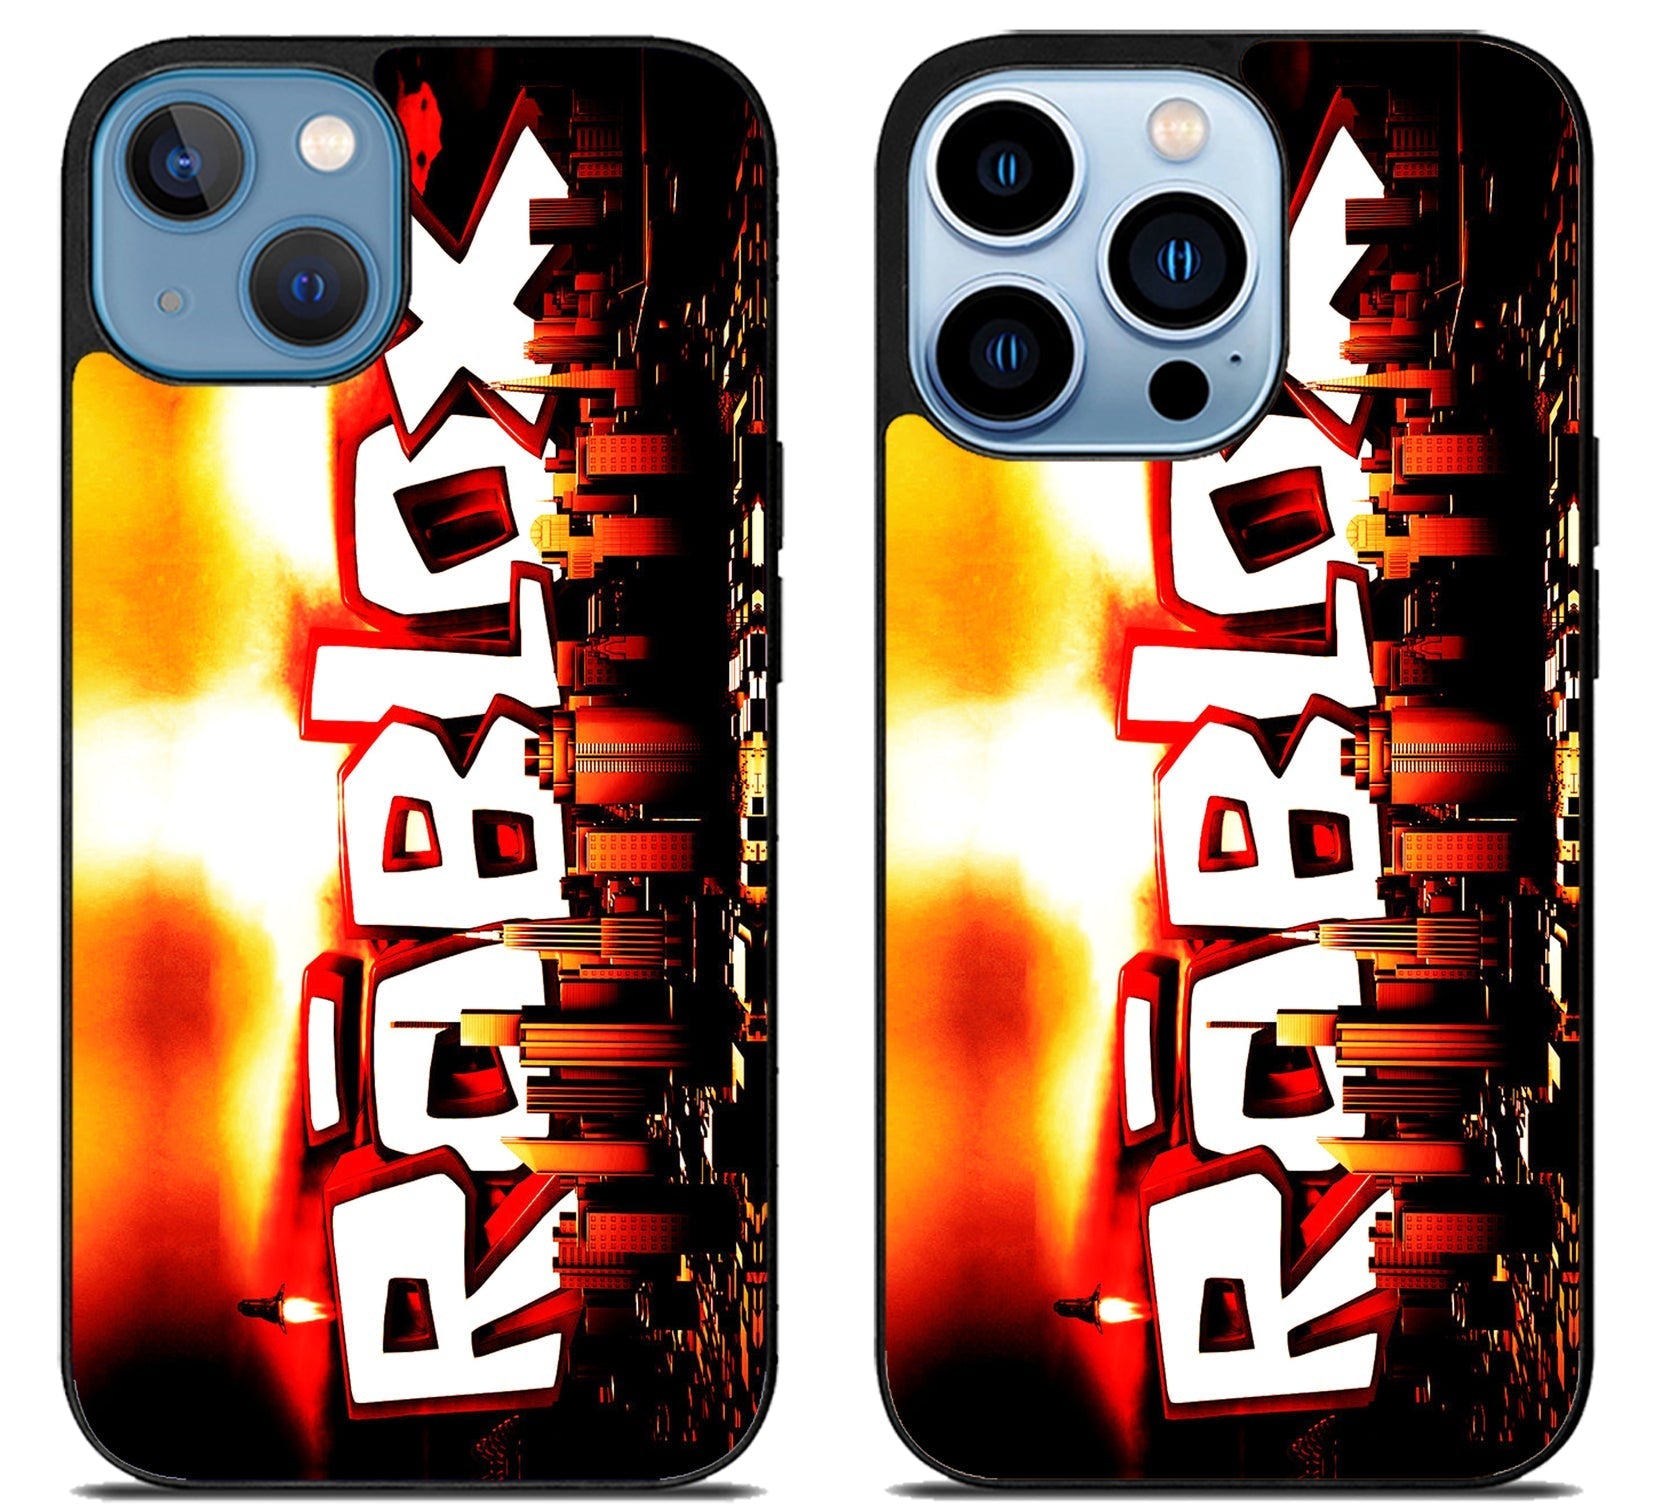 ROBLOX GAMES LOGO iPhone Case Cover